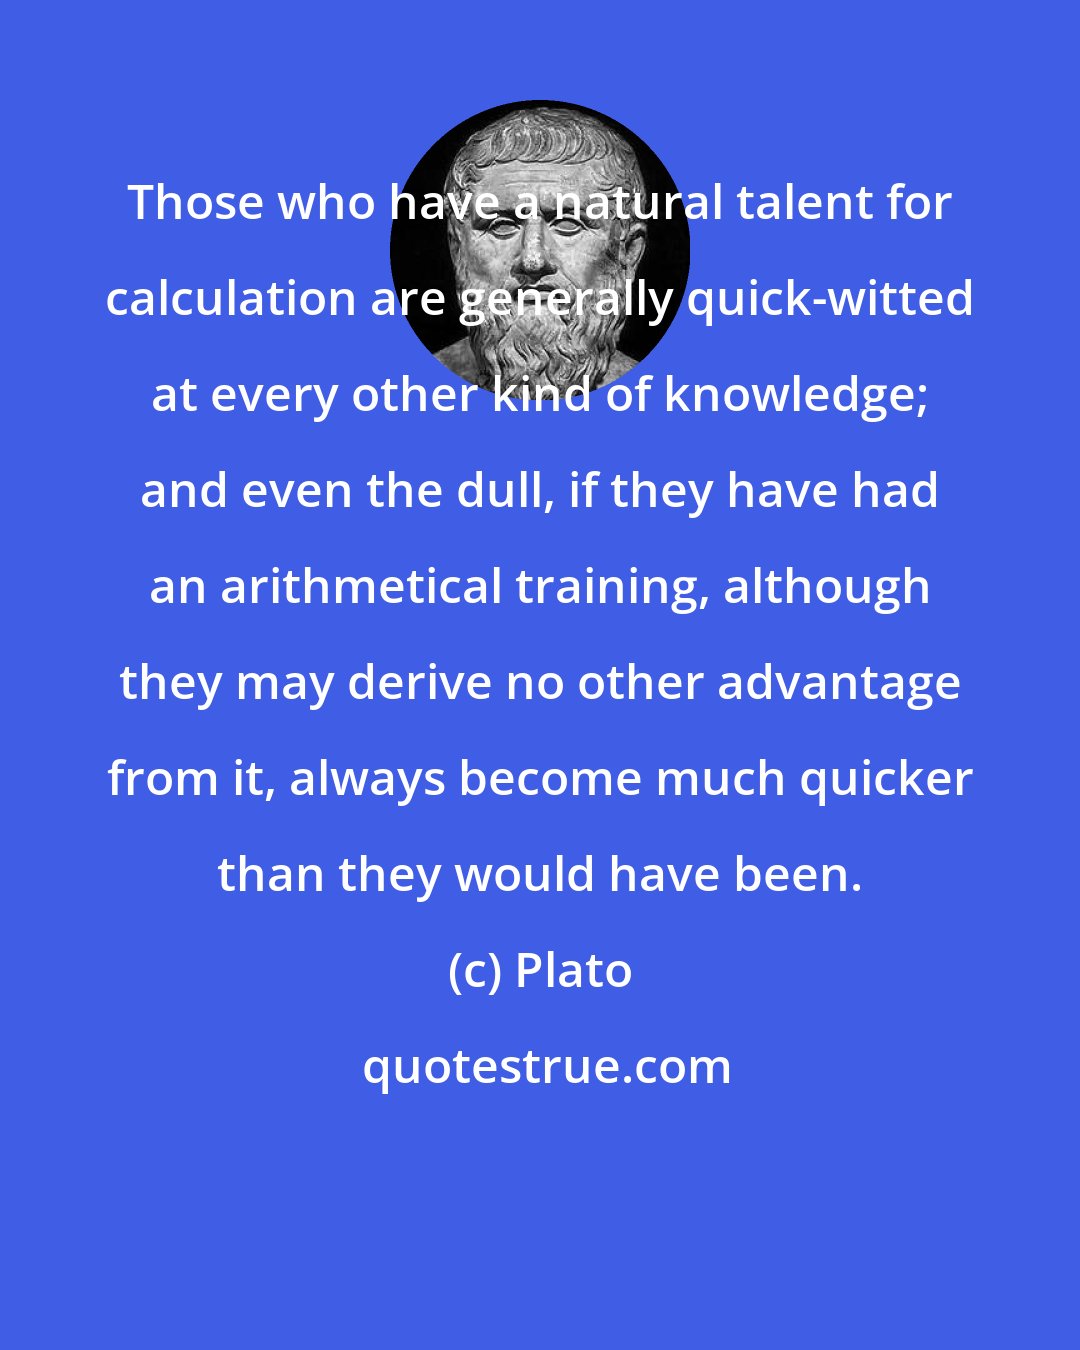 Plato: Those who have a natural talent for calculation are generally quick-witted at every other kind of knowledge; and even the dull, if they have had an arithmetical training, although they may derive no other advantage from it, always become much quicker than they would have been.